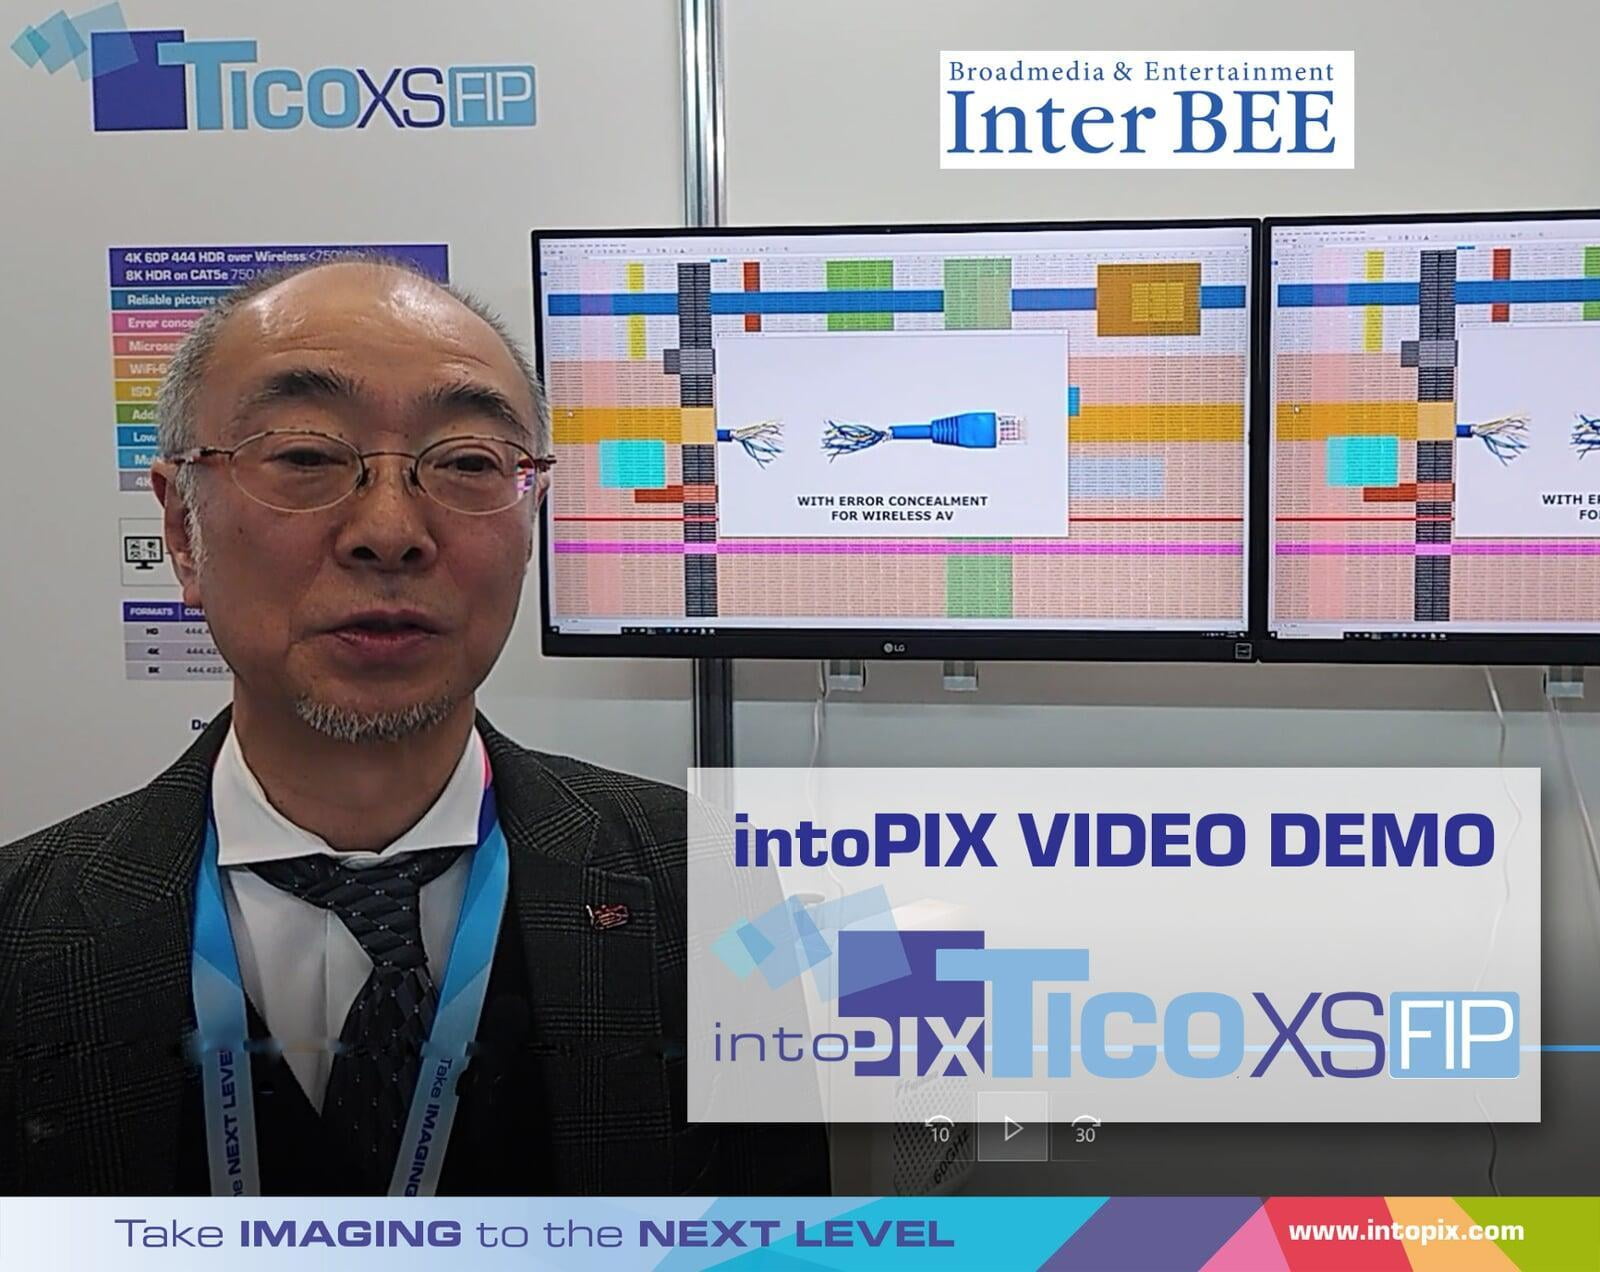 Japanese Video Demo from interBEE 2022 : intoPIX TicoXS FIP for wireless transmission